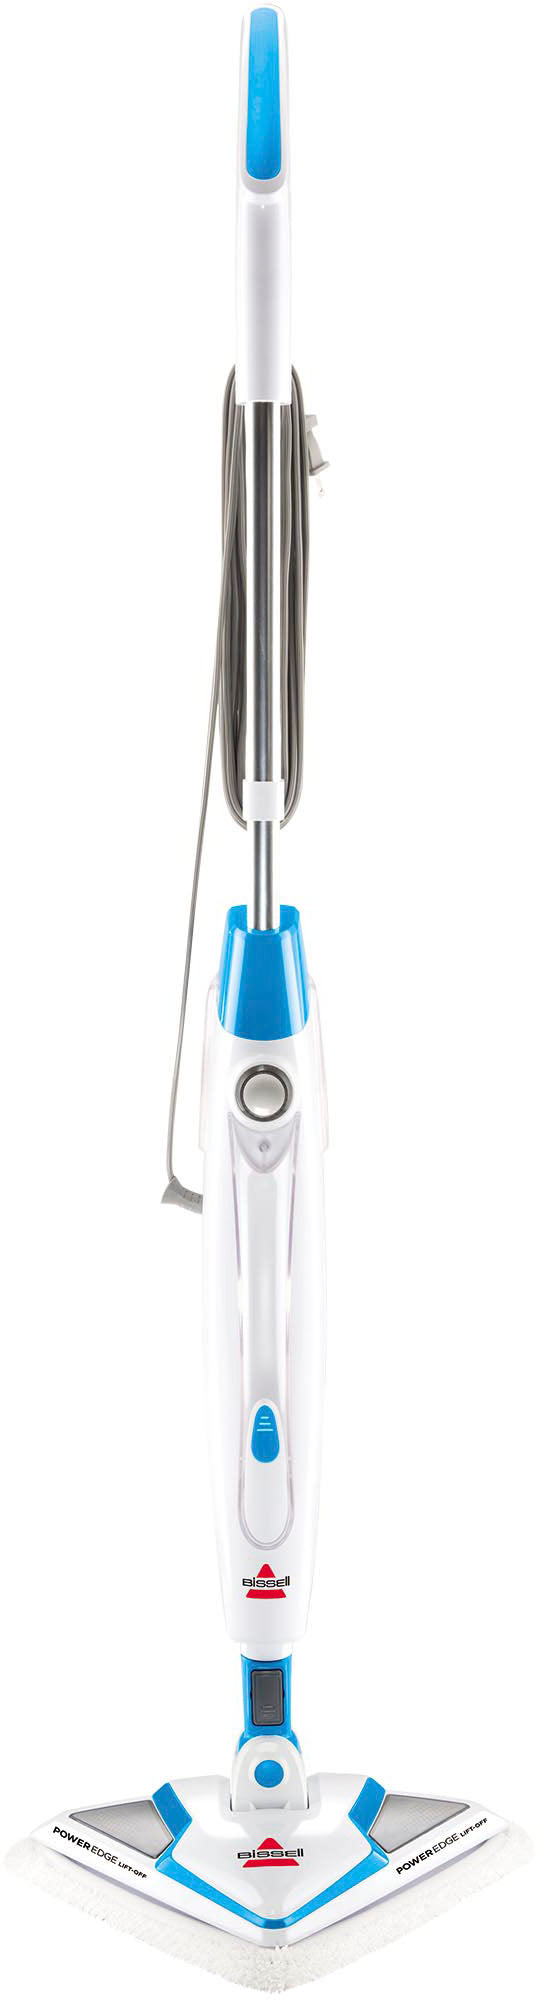 BISSELL - PowerEdge Lift-Off 2-in-1 Sanitizing Steam Mop - Basanova Blue with White Accents_0